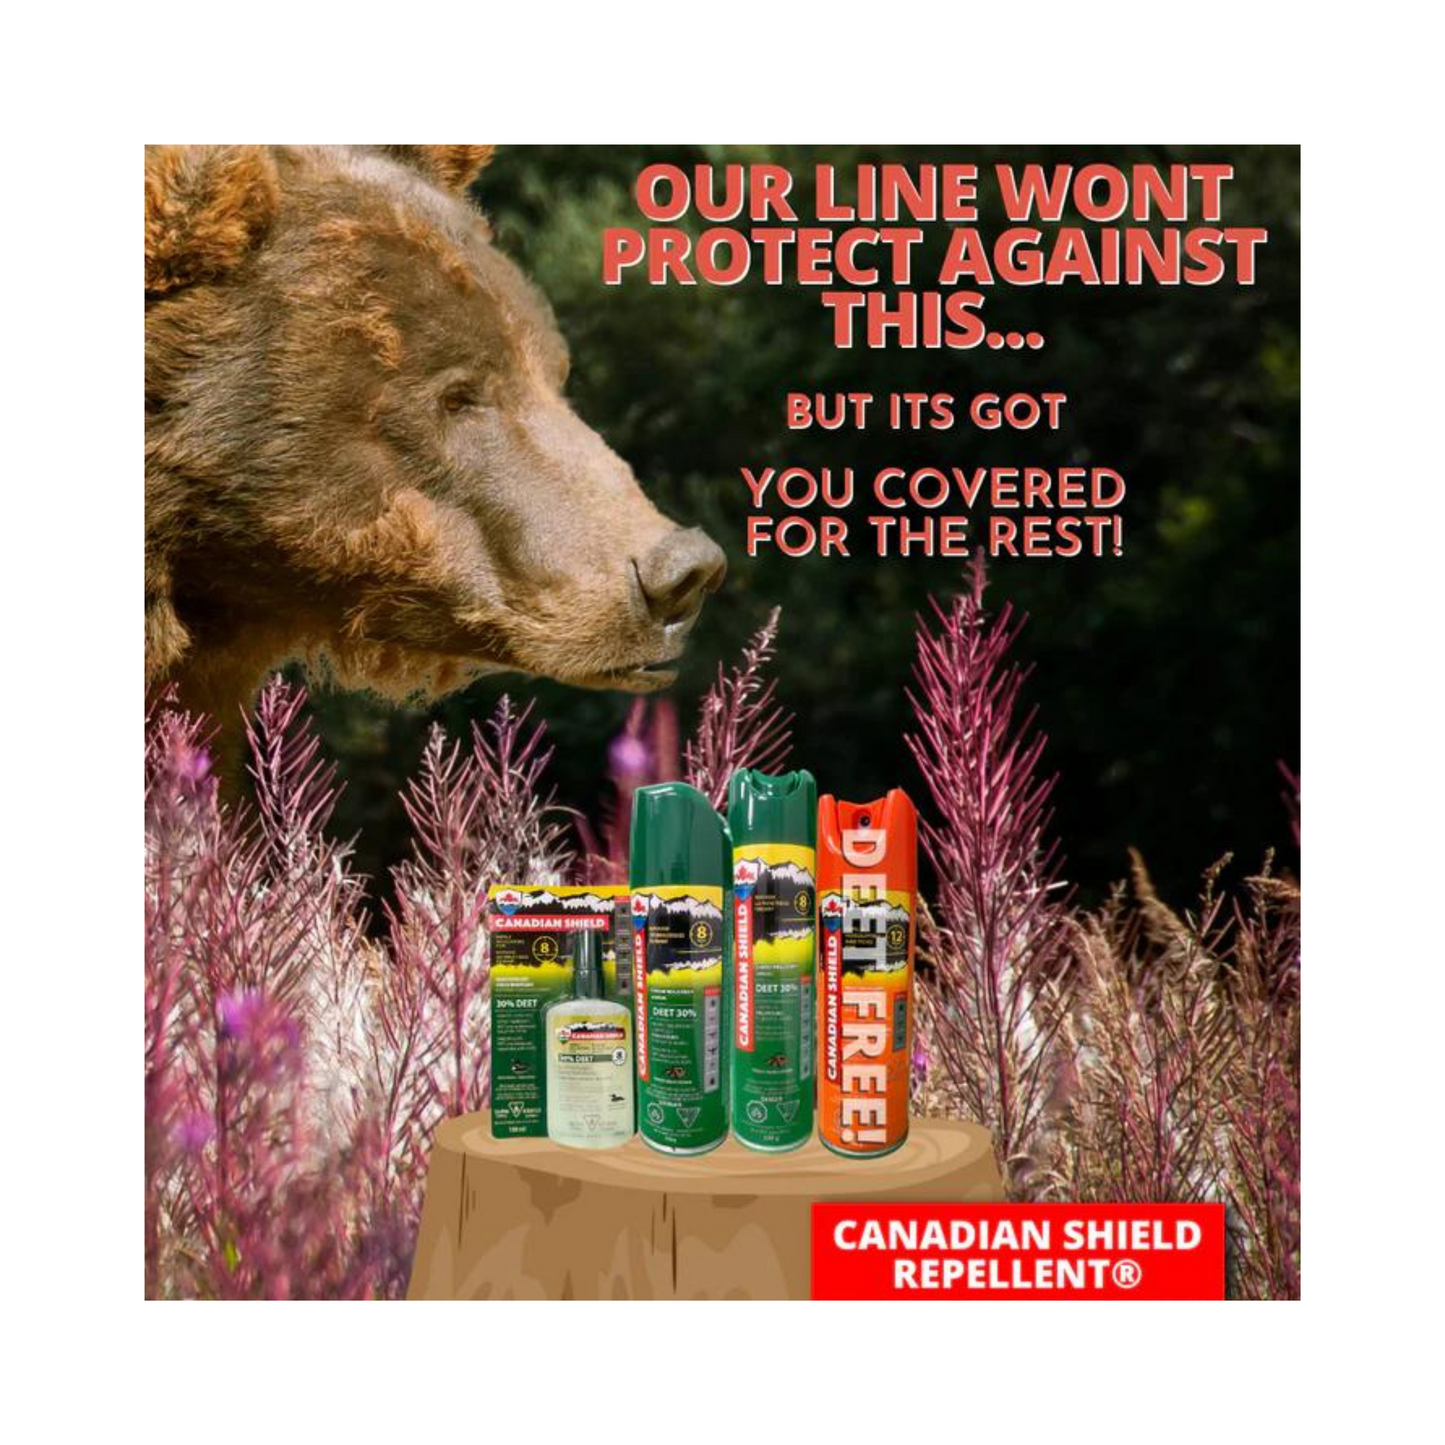 Canadian Shield Mosquito & Insect Repellent Aerosol | DEET FREE! | Bug Spray Formulated for Hunting, Fishing, Camping, Family Fun, and Anything Outdoors | Up to 12 Hours of Protection (142G)